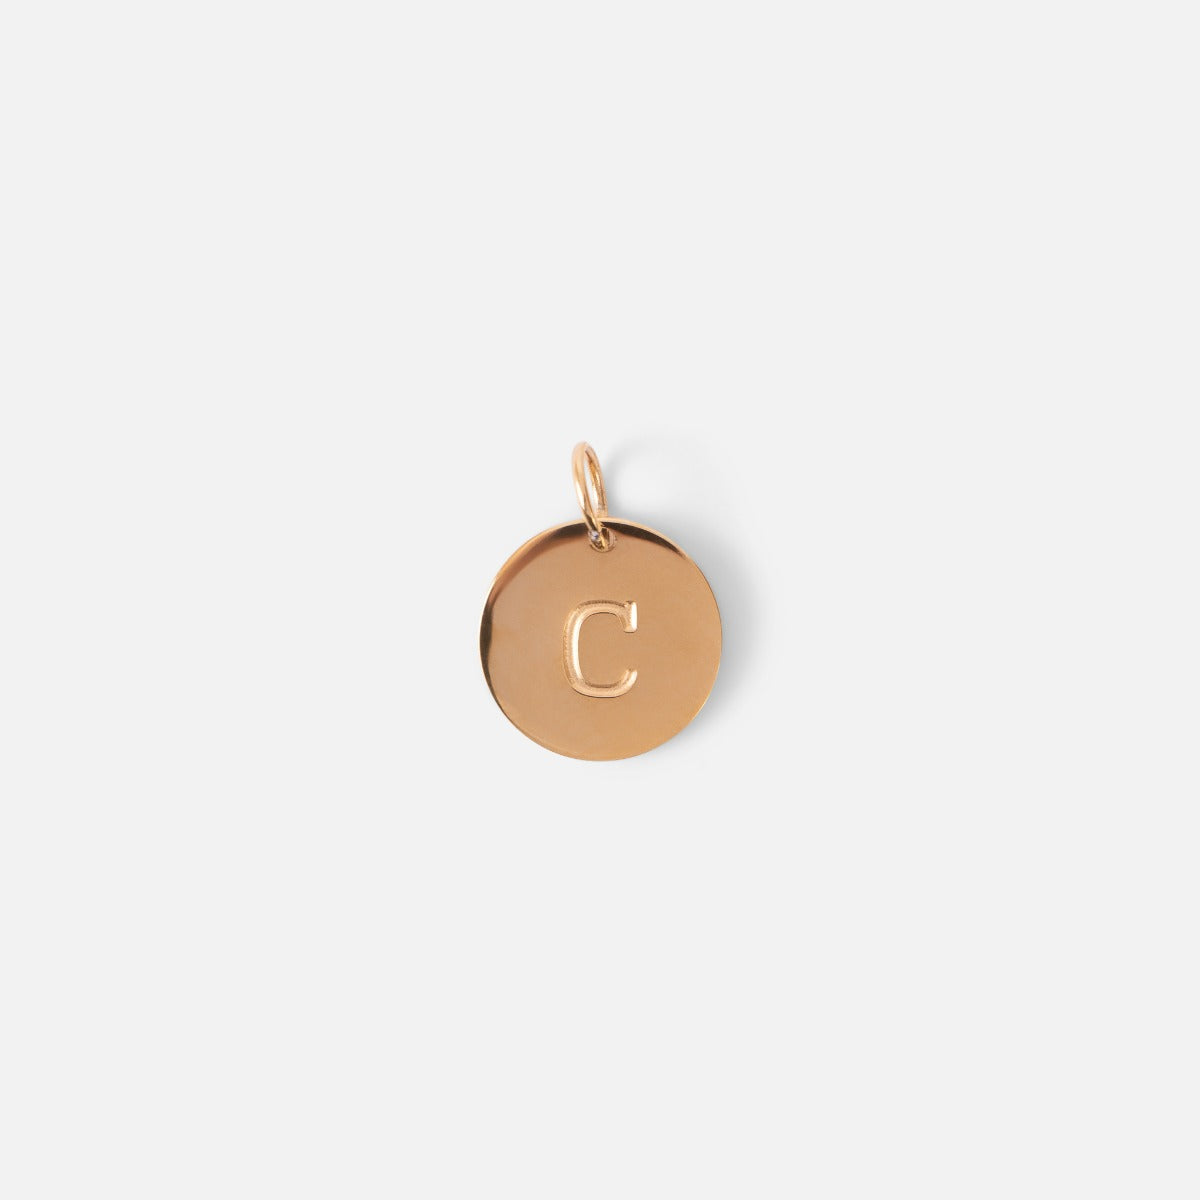 Small symbolic golden charm engraved with the letter of the alphabet "c"